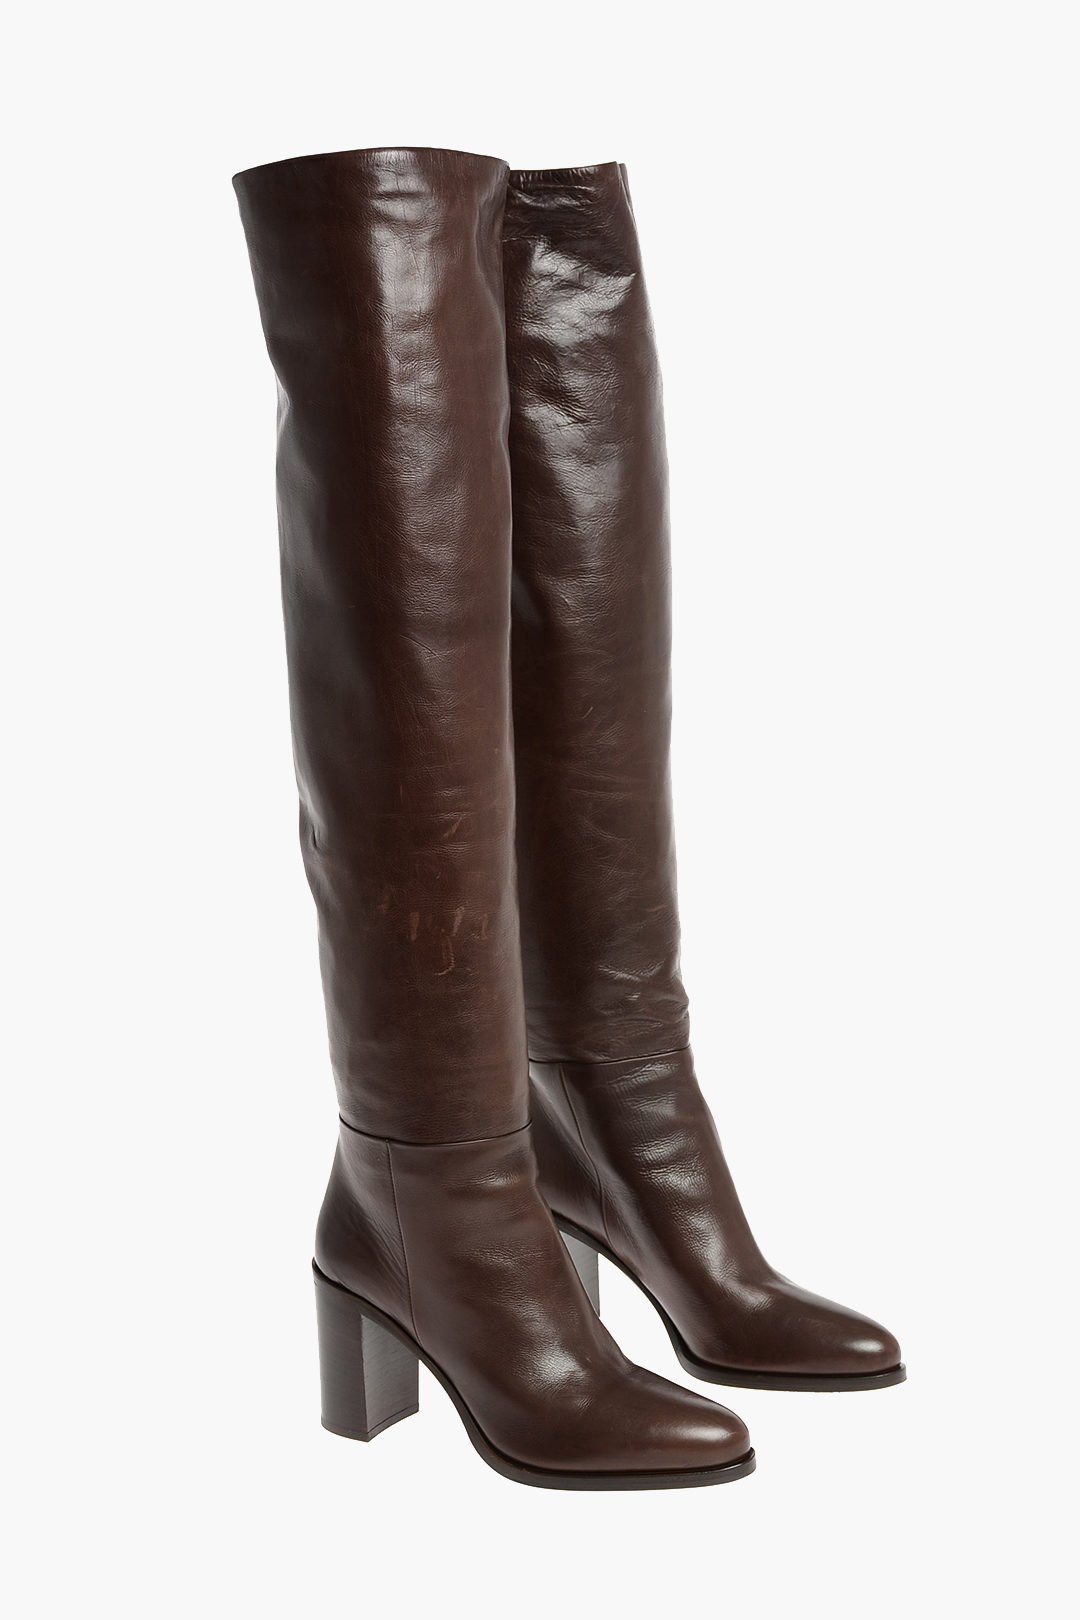 Prada Over the Knee Leather Boots with Chunky Heels women - Glamood Outlet